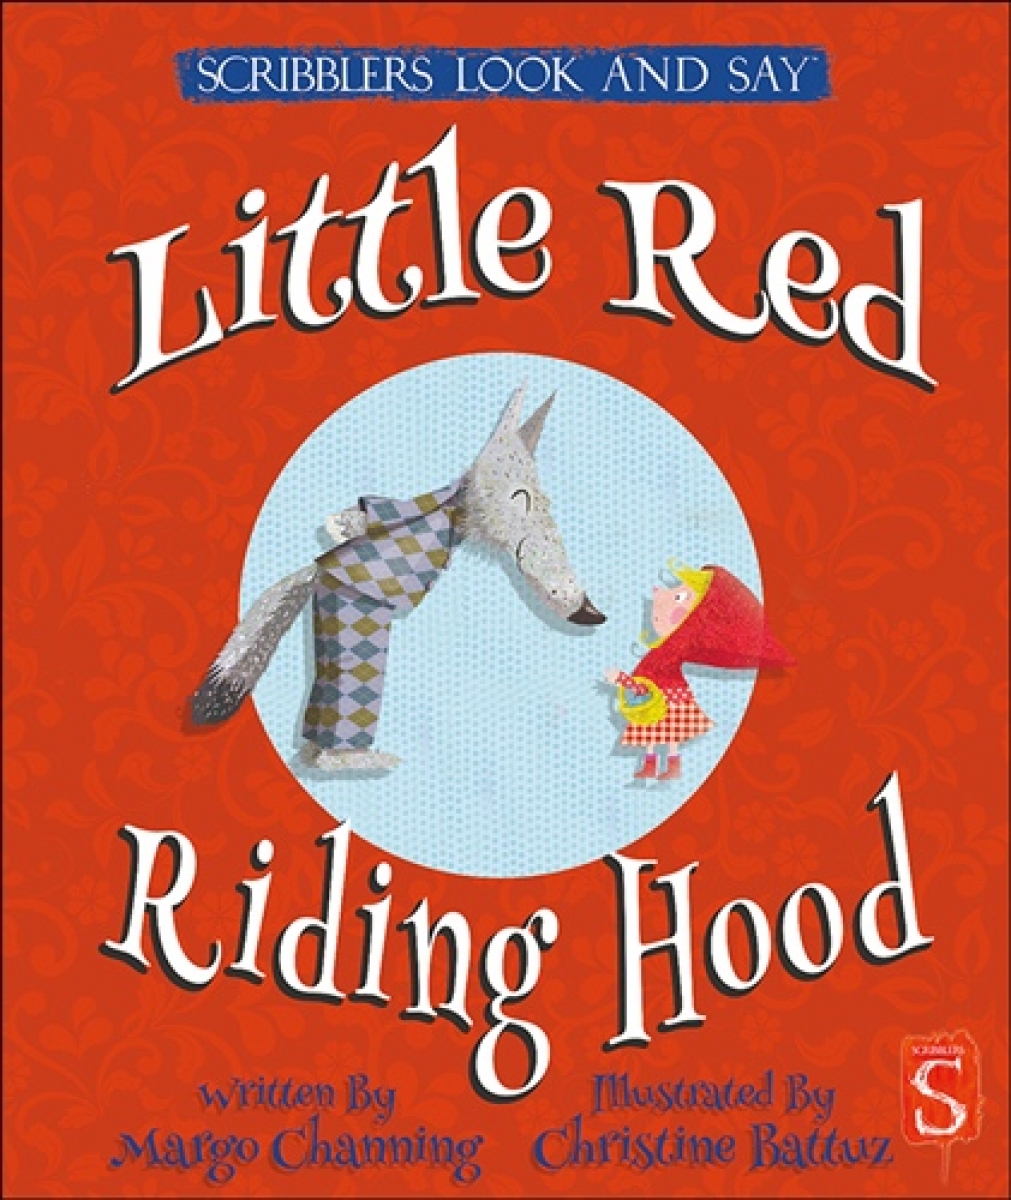 Channing, Margot Scribblers Look and Say: Little Red Riding Hood 